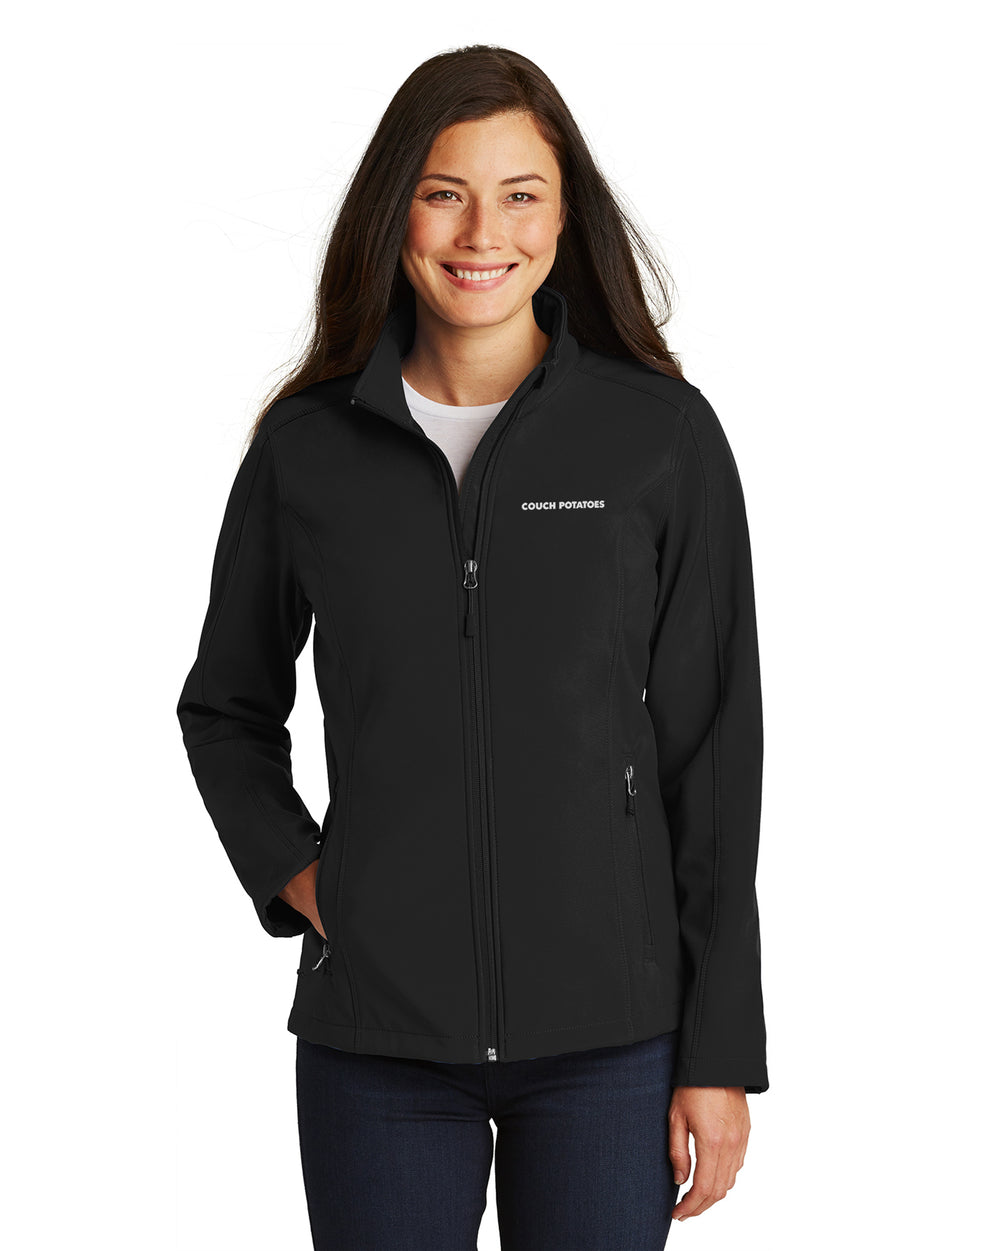 Couch Potatoes - Port Authority Ladies Core Soft Shell Jacket - L317